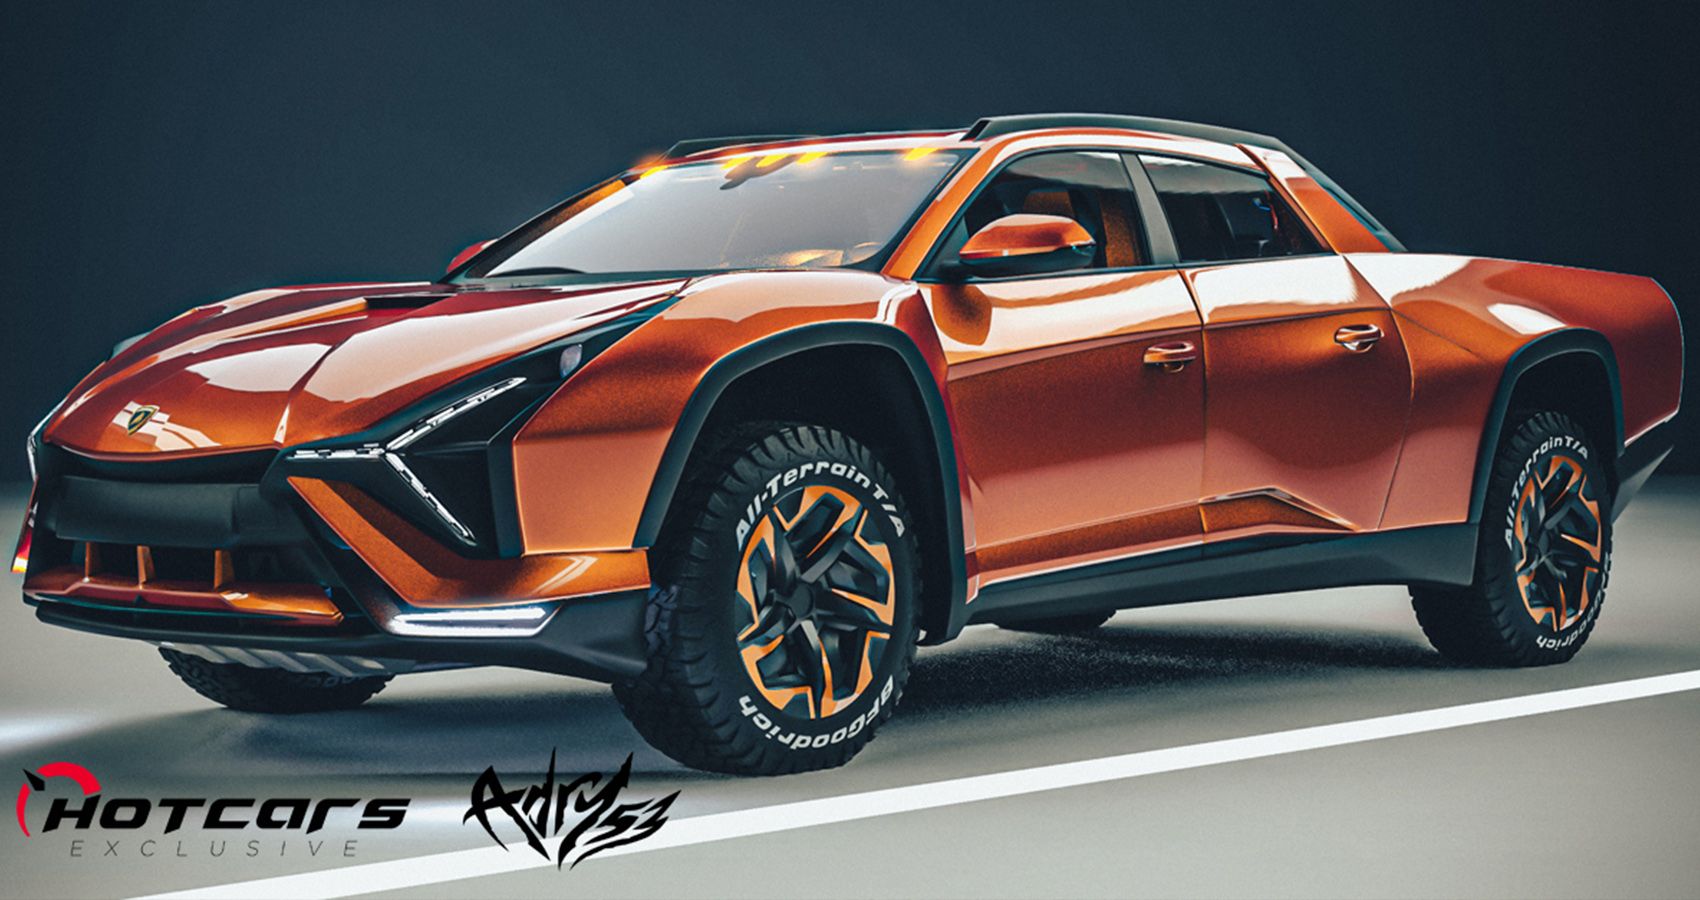 EXCLUSIVE: Check Out This Hypothetical Lamborghini Pickup Render